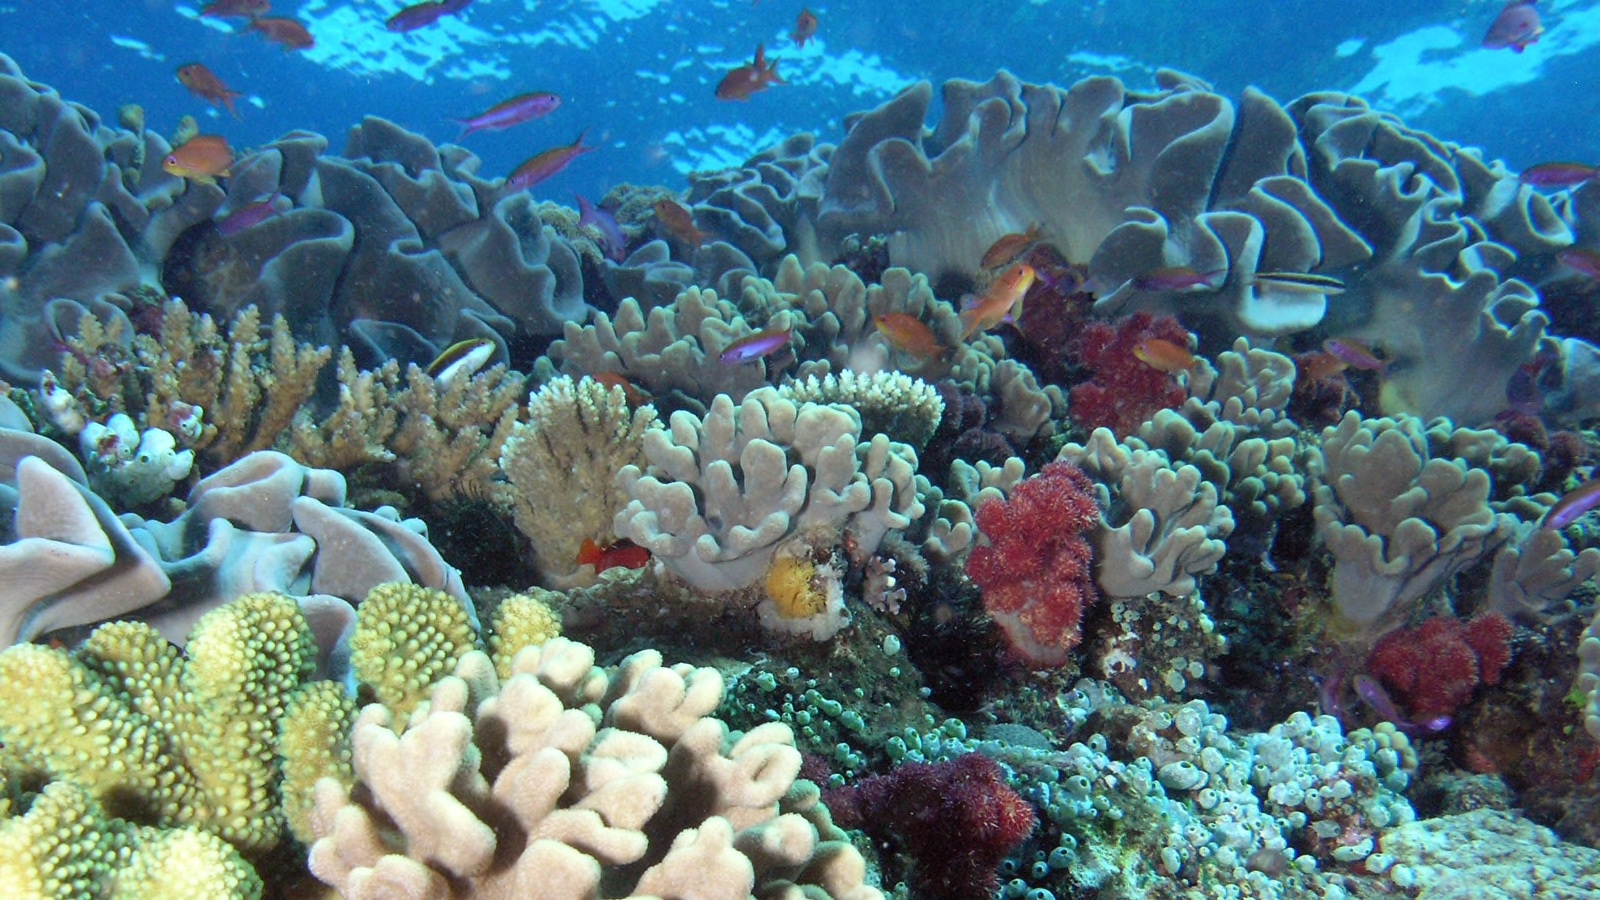 Researchers edit coral genes, hope to understand how to save them | Ars ...